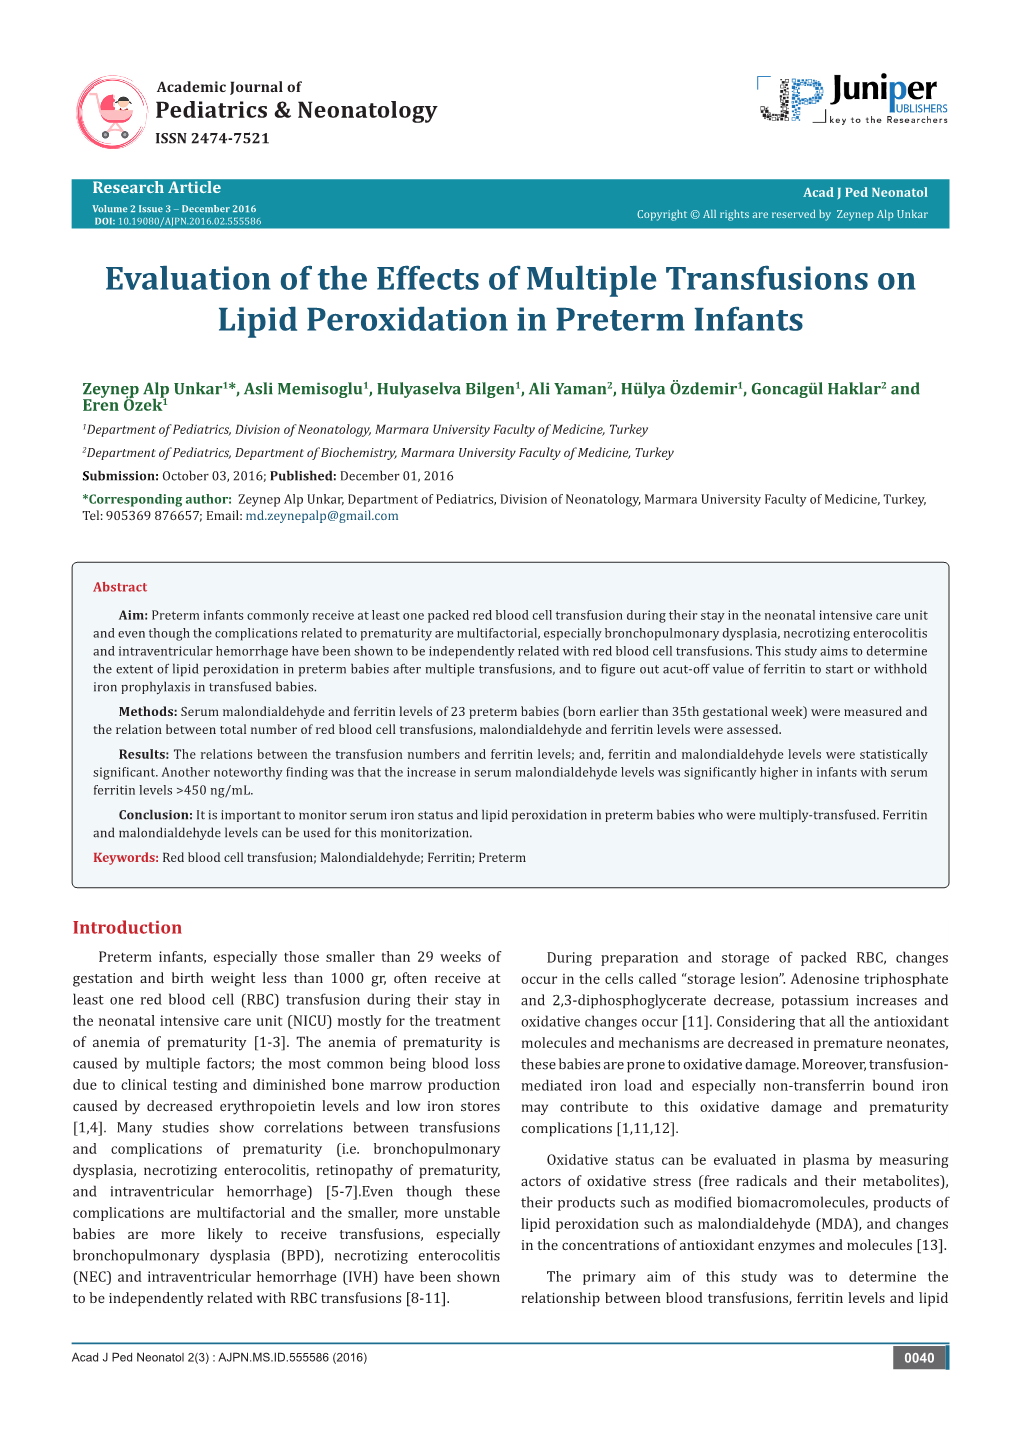 Evaluation of the Effects of Multiple Transfusions on Lipid Peroxidation in Preterm Infants